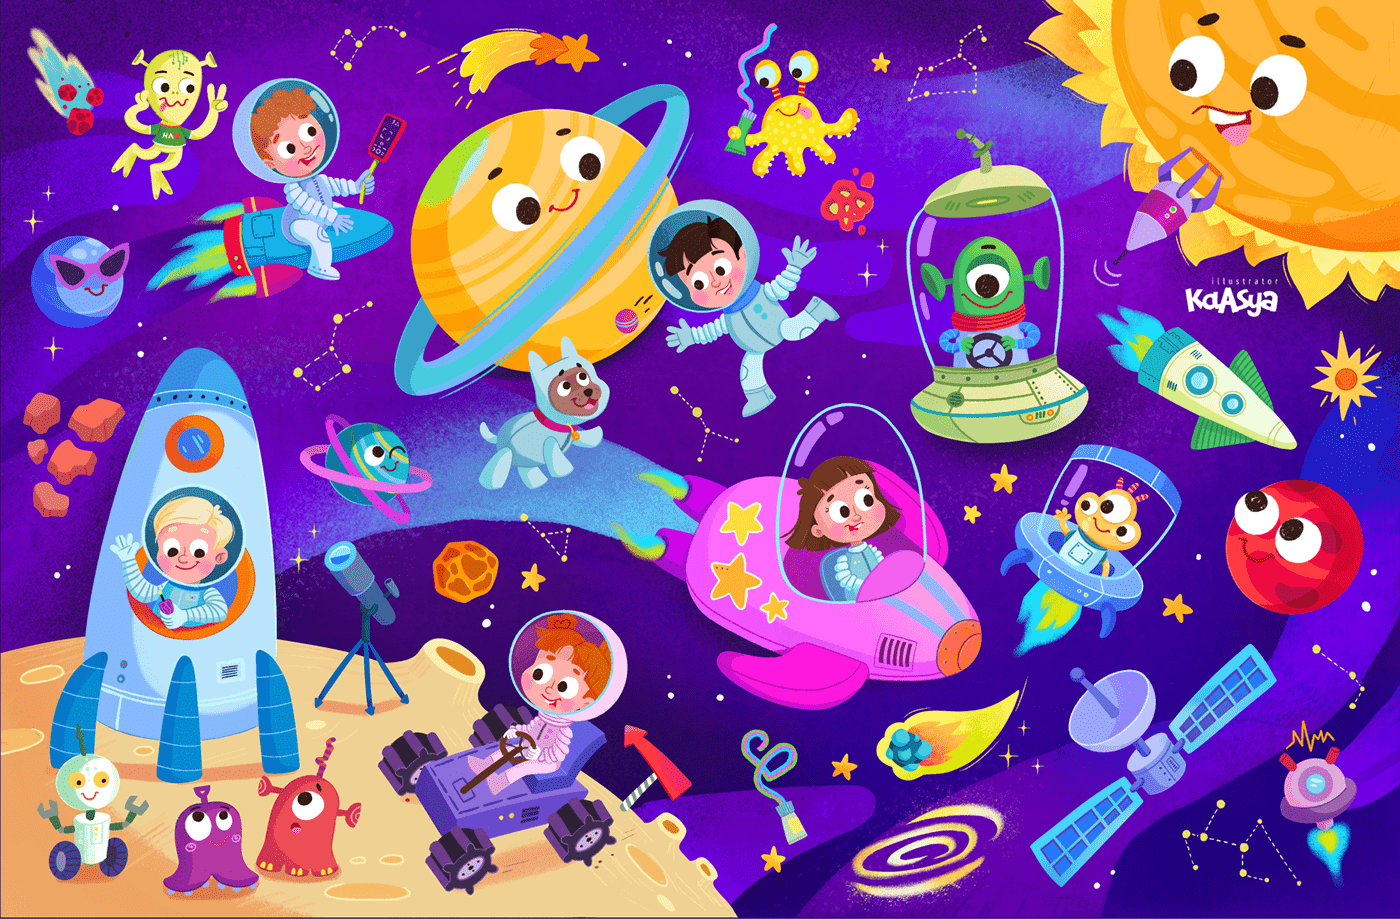 amusement park animals illustration Character design  children illustration kids illustration puzzle Space  Wimmelbuch виммельух пазлы